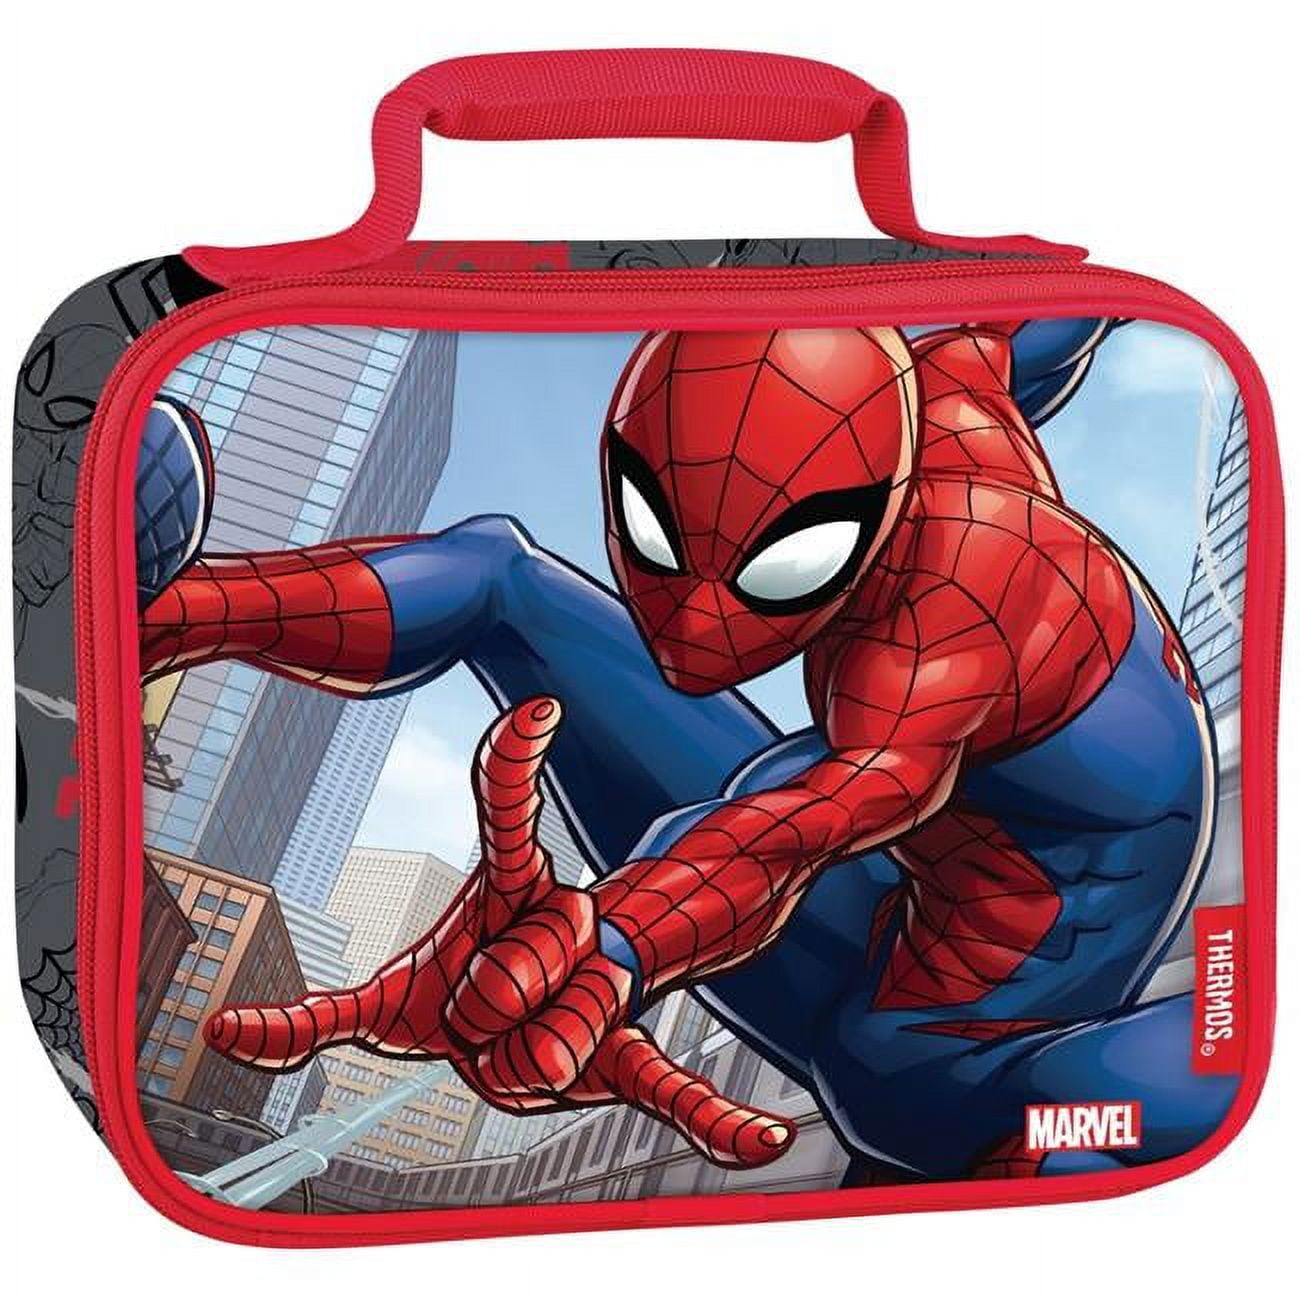 Marvel Spider man 3D Insulated Lunch Box Kids Travel School Picnic